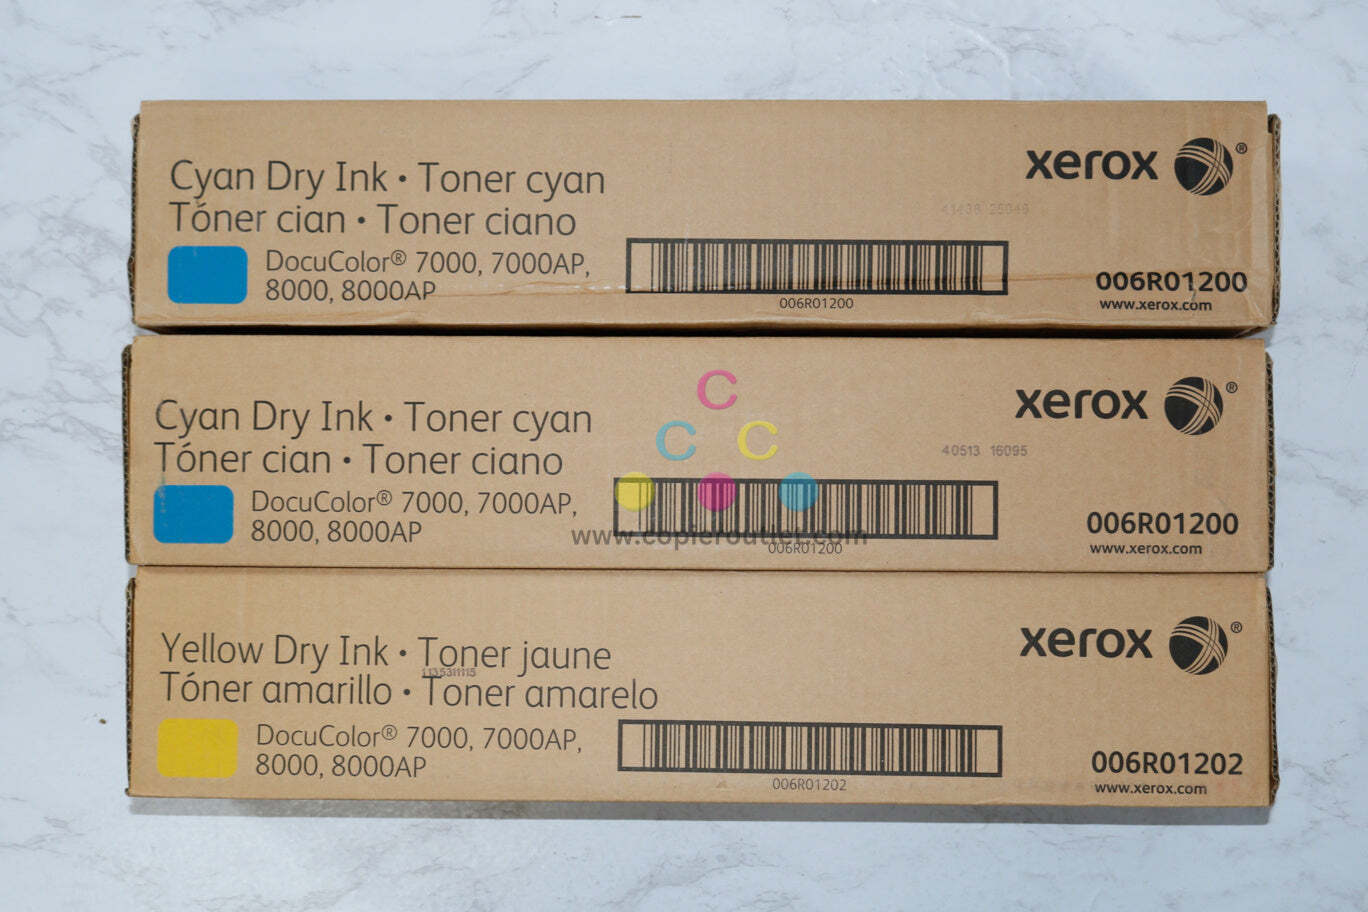 3 New OEM Xerox DocuColor 7000, 8000 CCY Toner Cartridges 006R01200, 006R01202